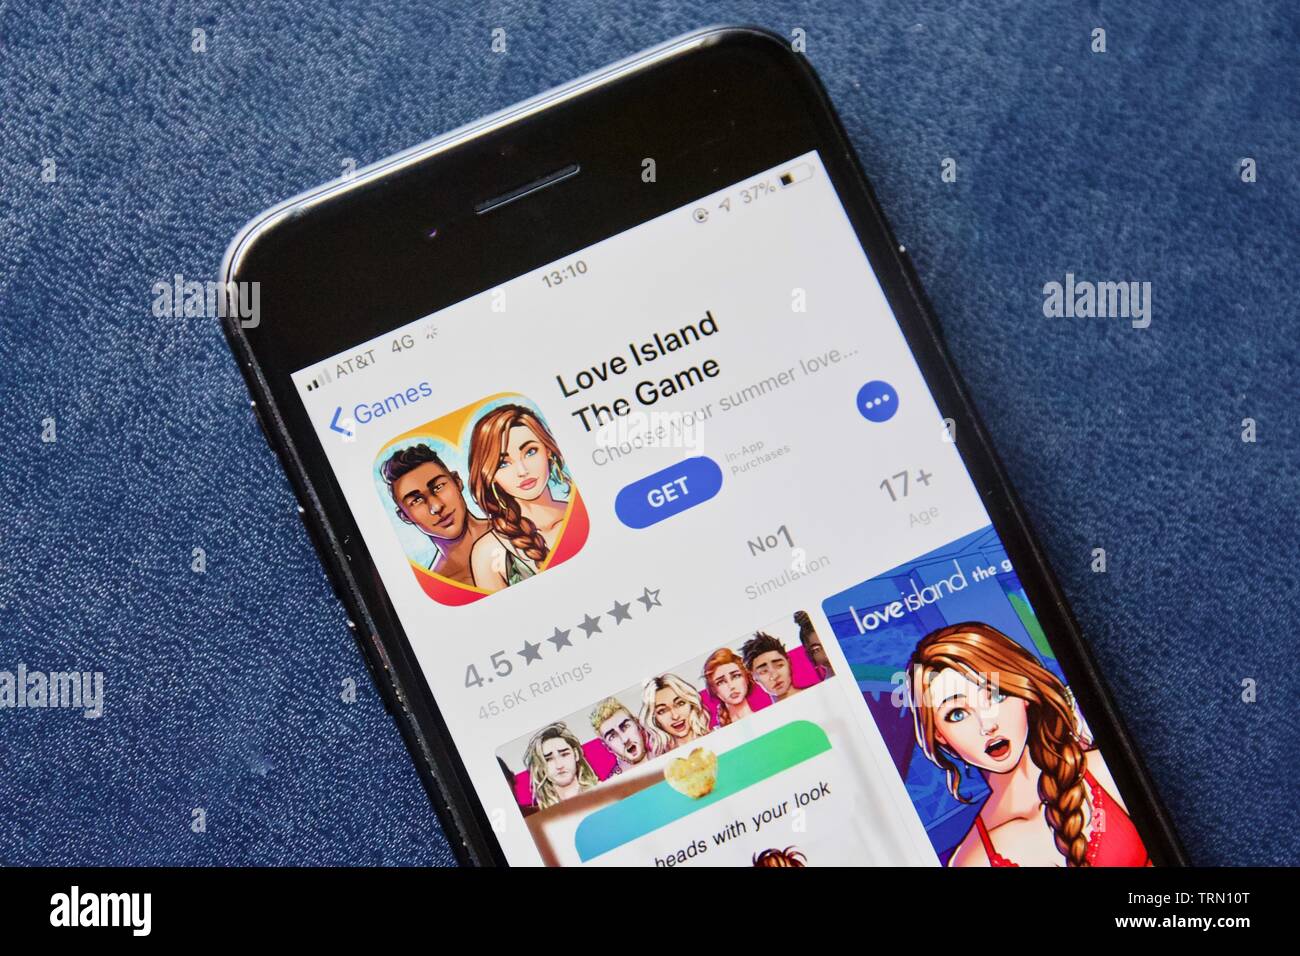 Love Island The Game, based on the popular UK reality show, on an iPhone Stock Photo